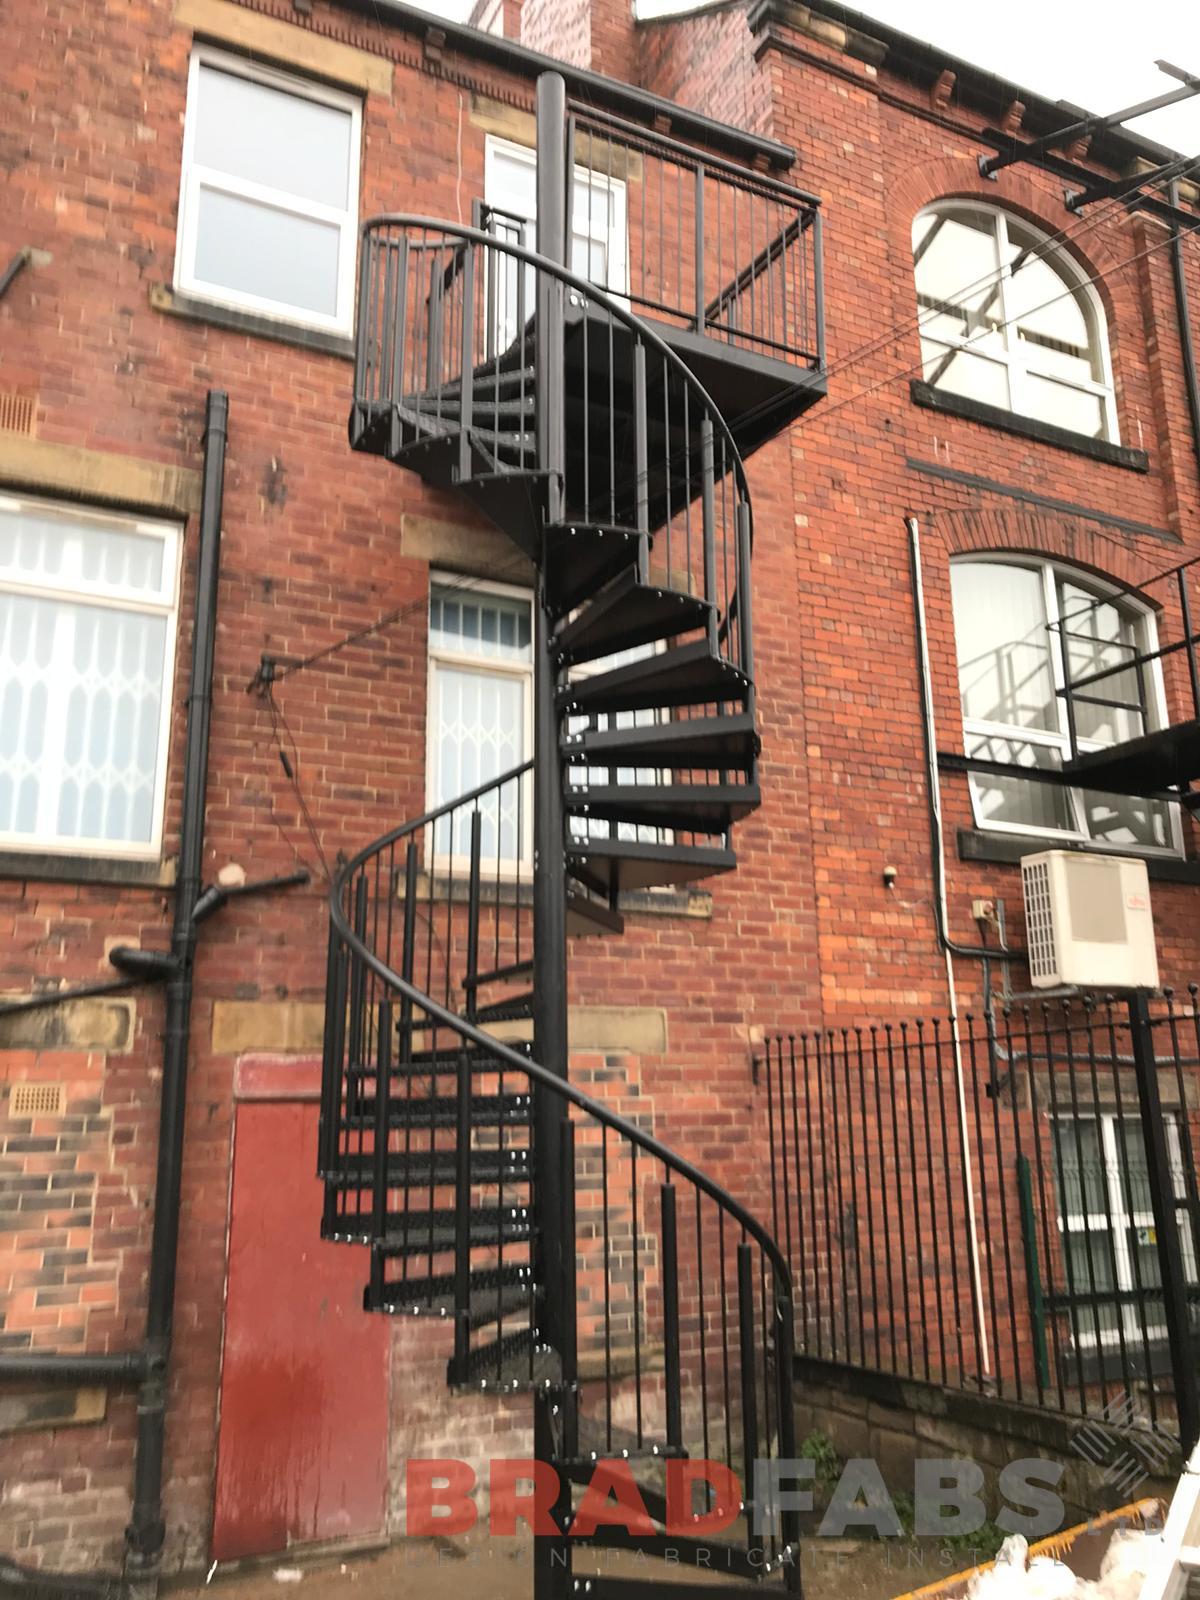 Custom made external fire escape access staircase by Bradfabs